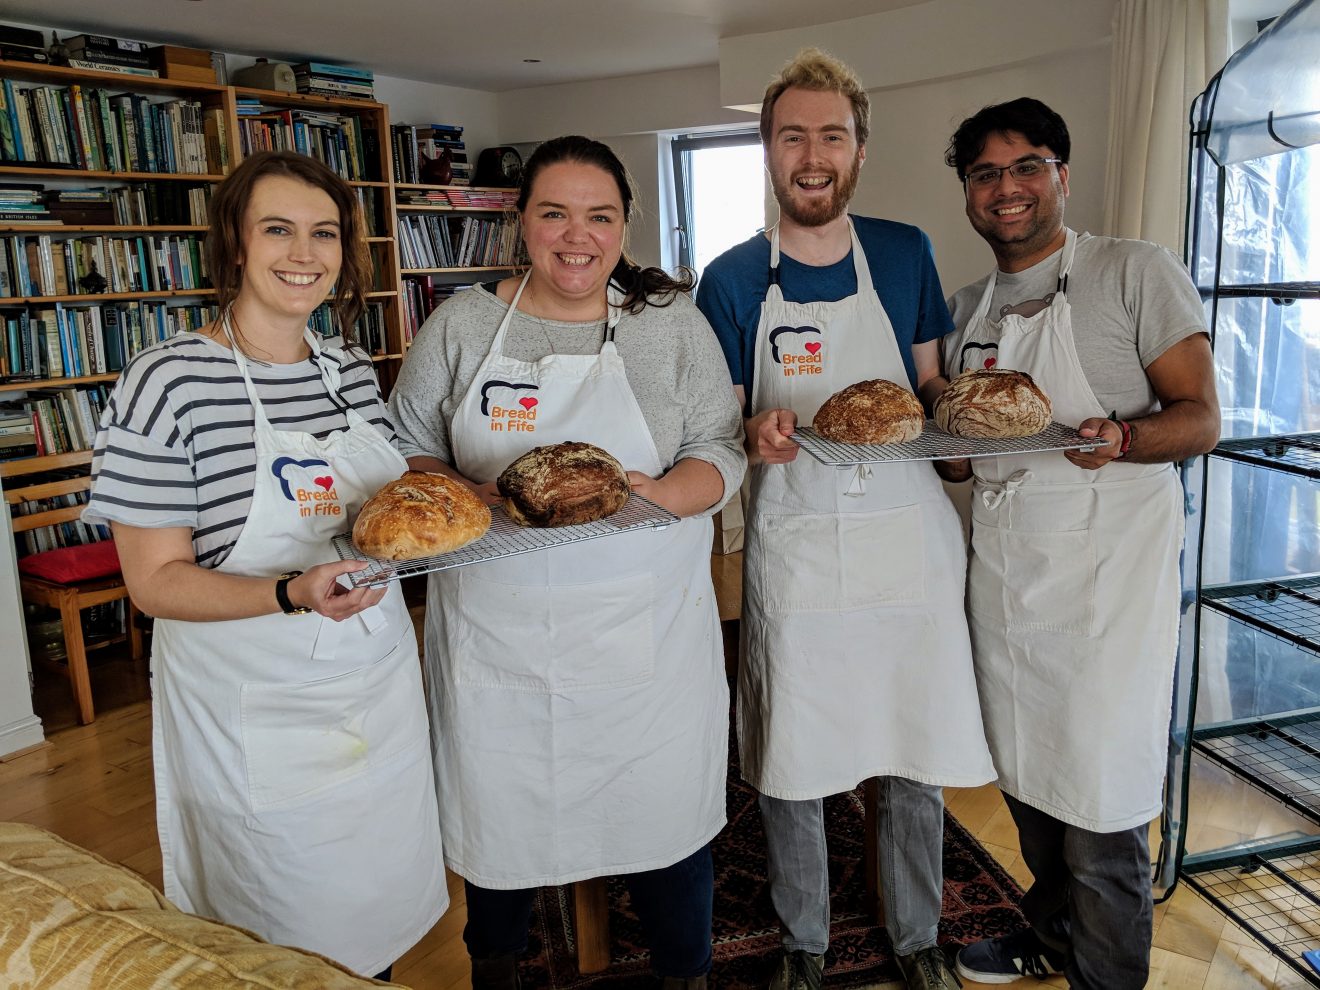 Louise, Alex, me and Jamie with our breads